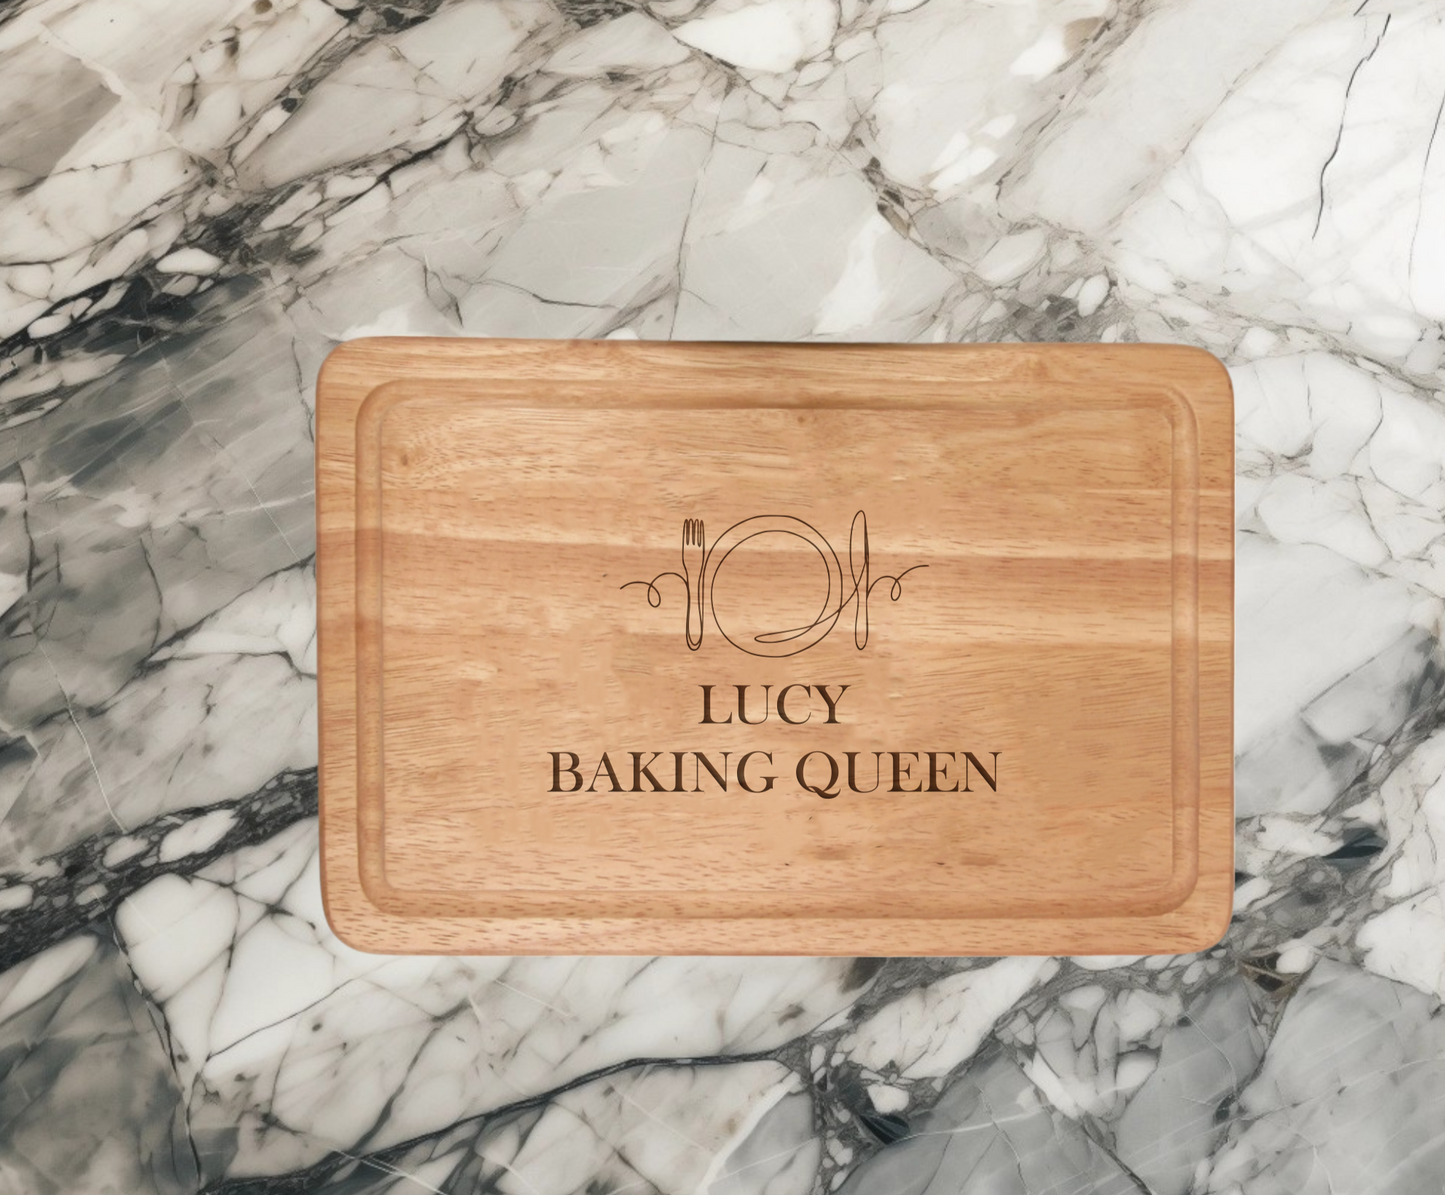 Discover premium quality at our Shopify store with our 300x200mm Personalized Chopping Board Knife & Fork Design. Engrave up to 2 lines, 20 characters each. Versatile and classy!